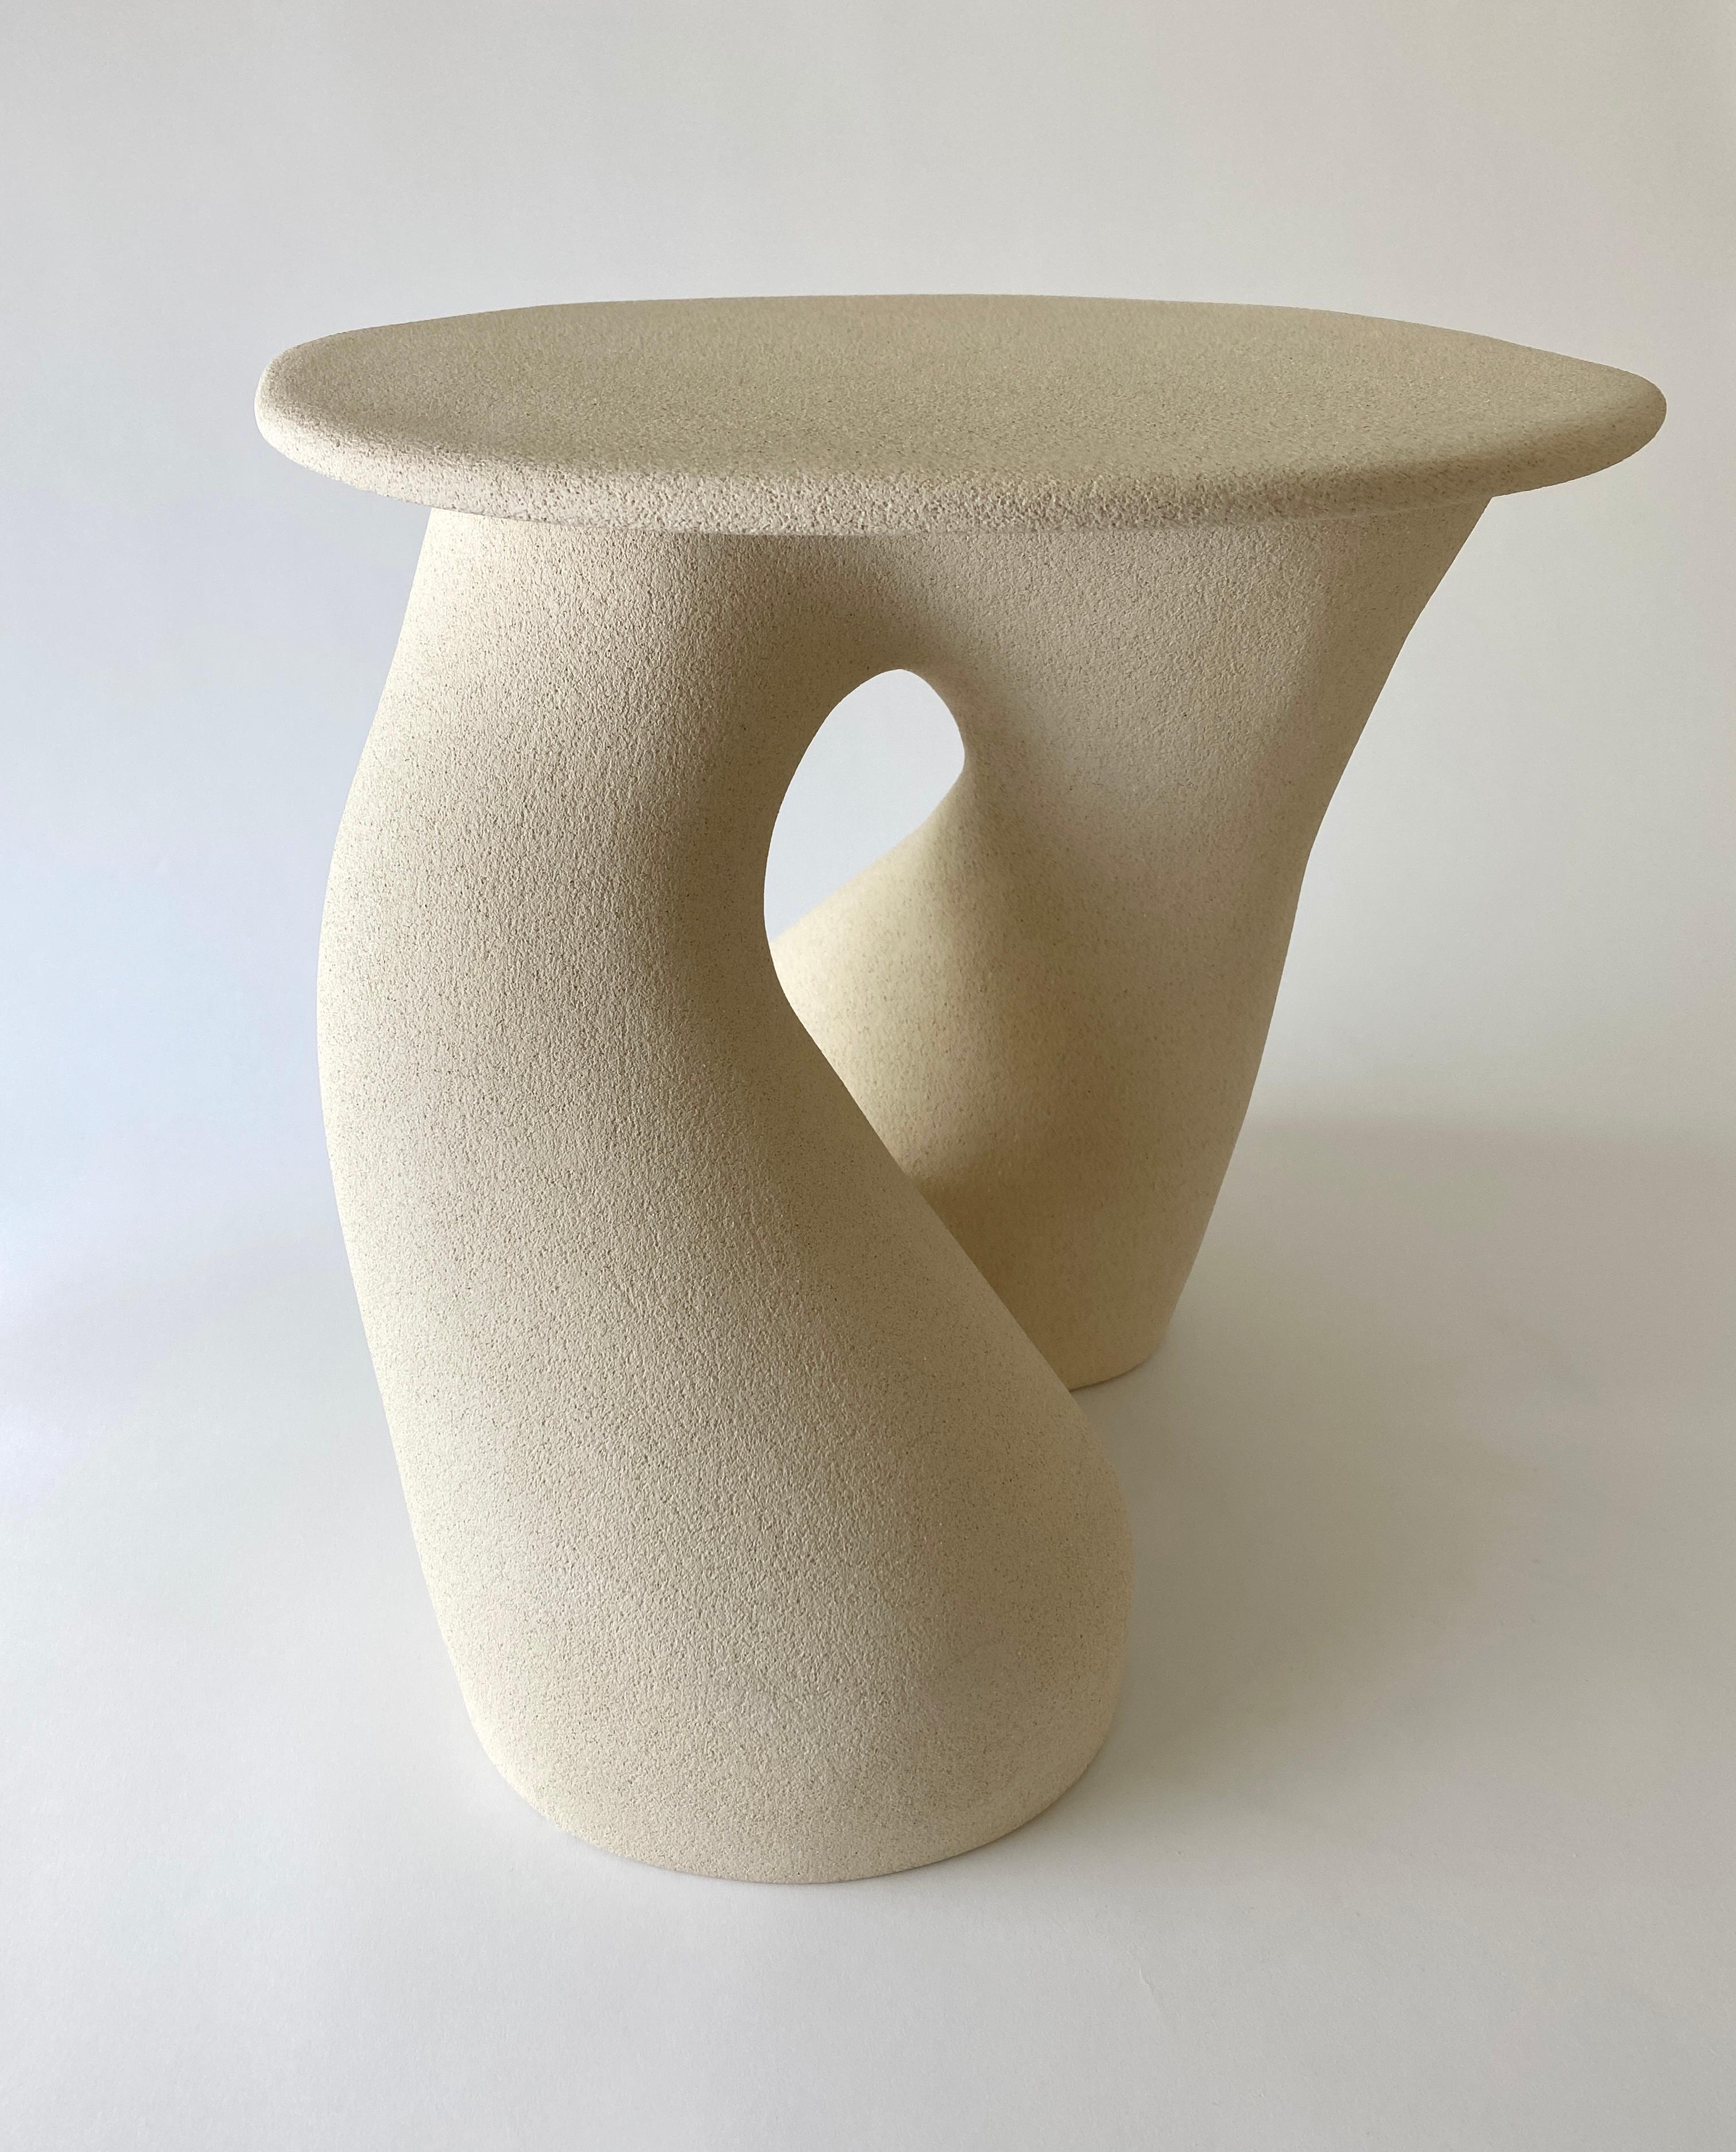 Sandstone Gabrielle side table handsculped by Hermine Bourdin 
Unique
Dimensions: 40 x 40 x 40 cm
Materials: Sandstone

In my work I’m trying to represent women who are free, who are generous, voluptuous, sensual, strong, thriving and protective.
To